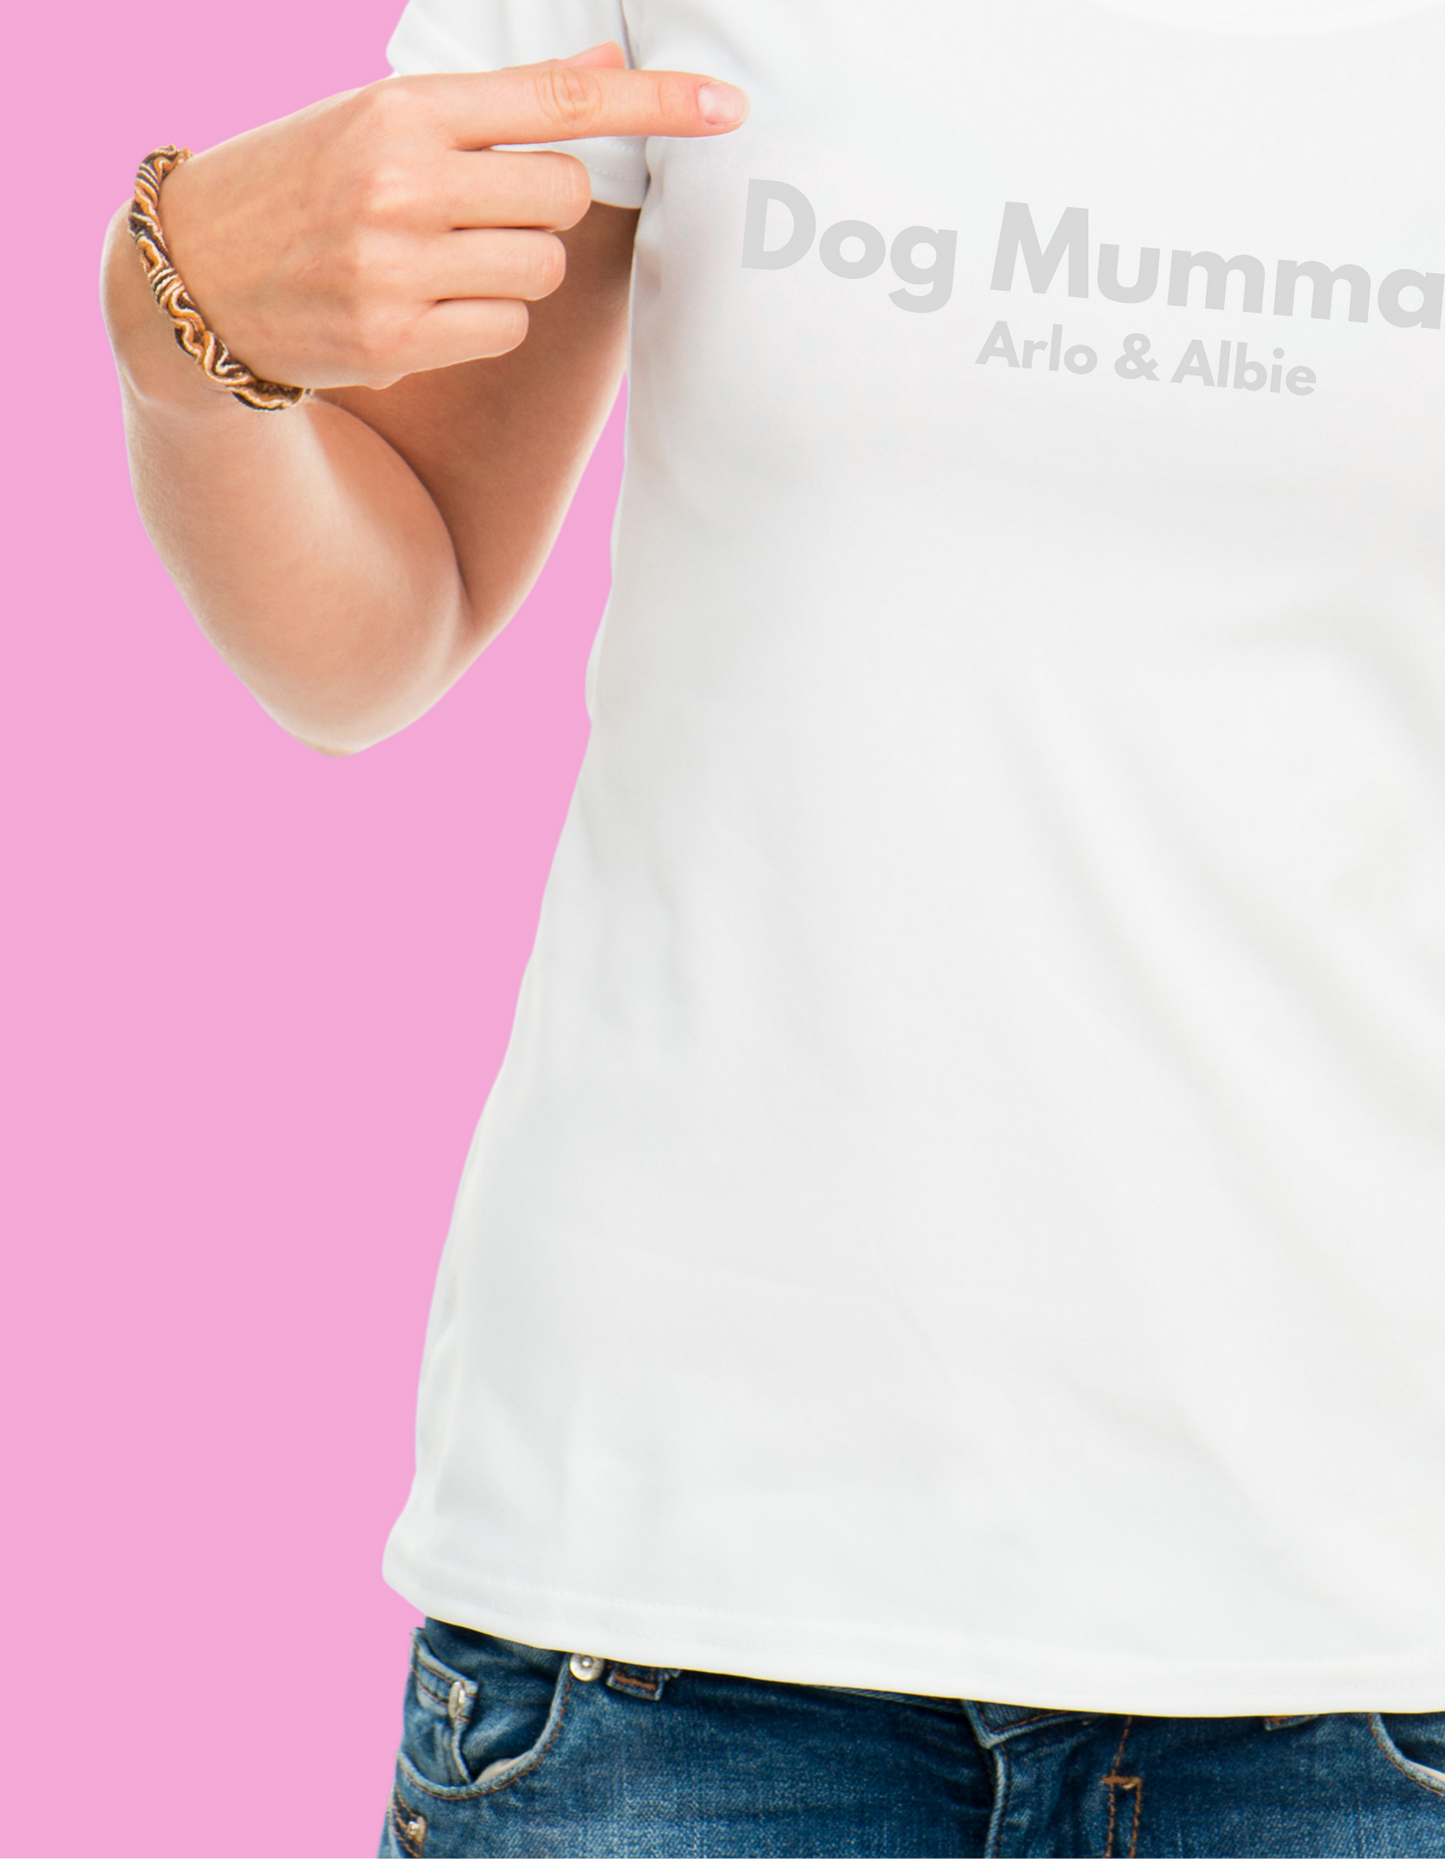 Embroidered Personalised Dog Momma T-Shirt